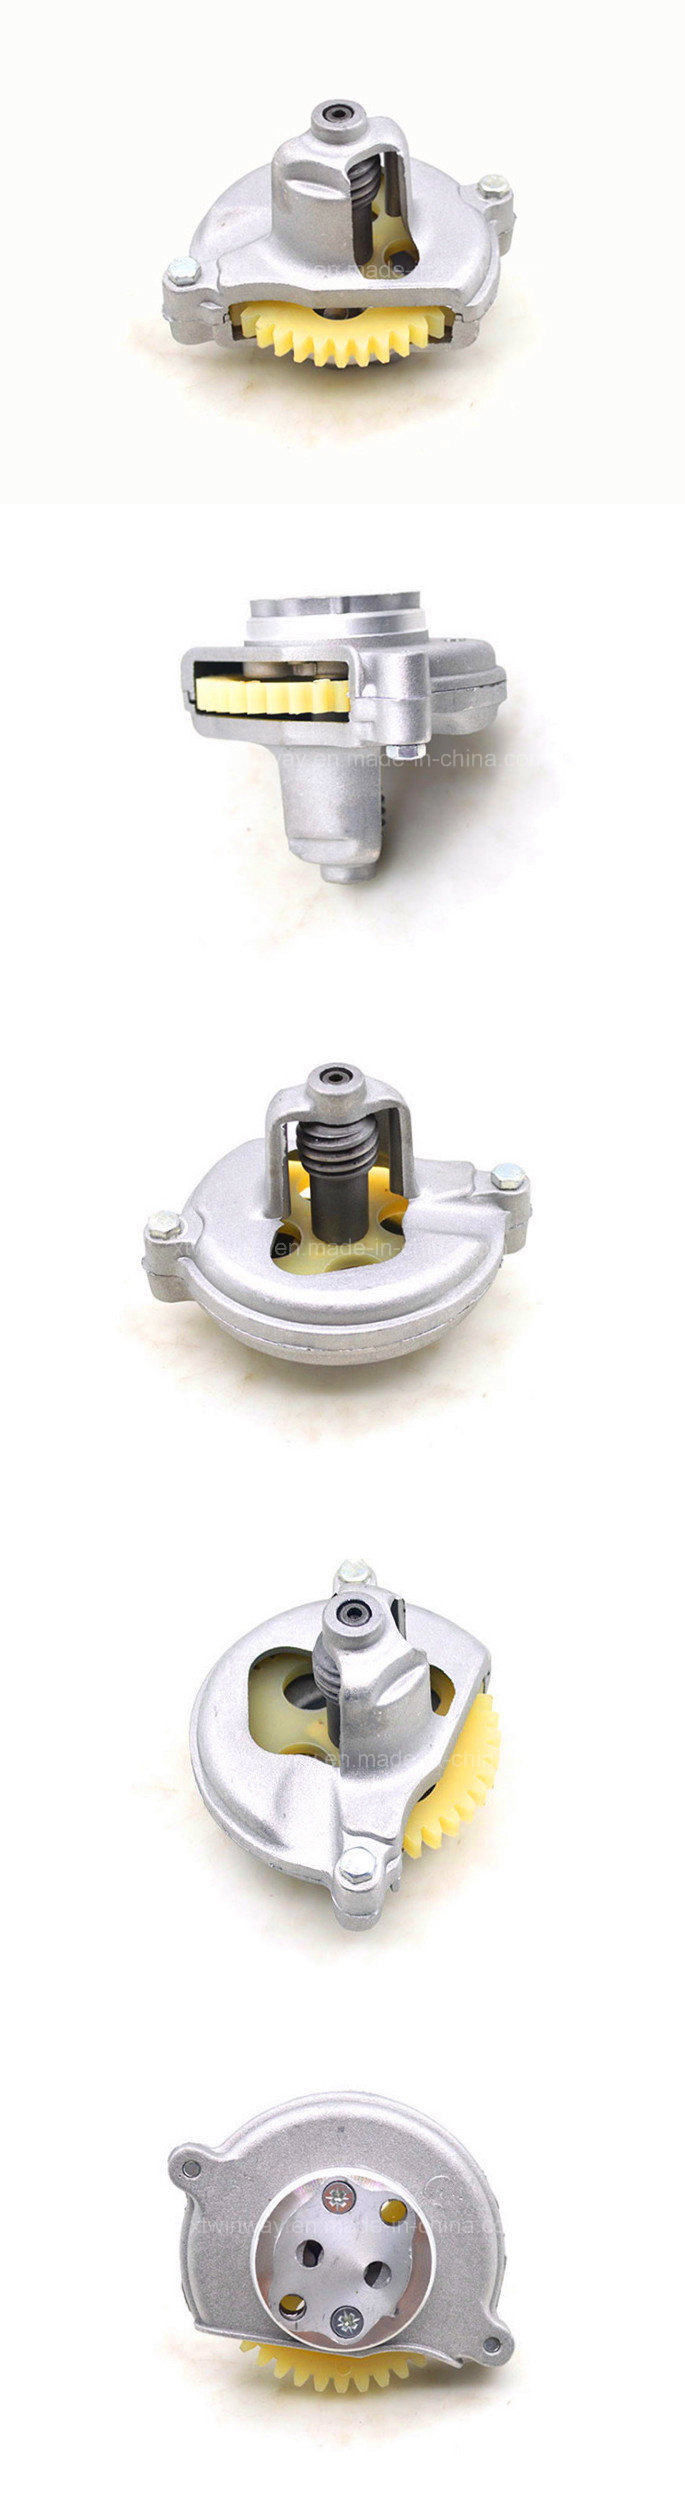 Motorcycle Engine Oil Pump Assy for Honda Cg125